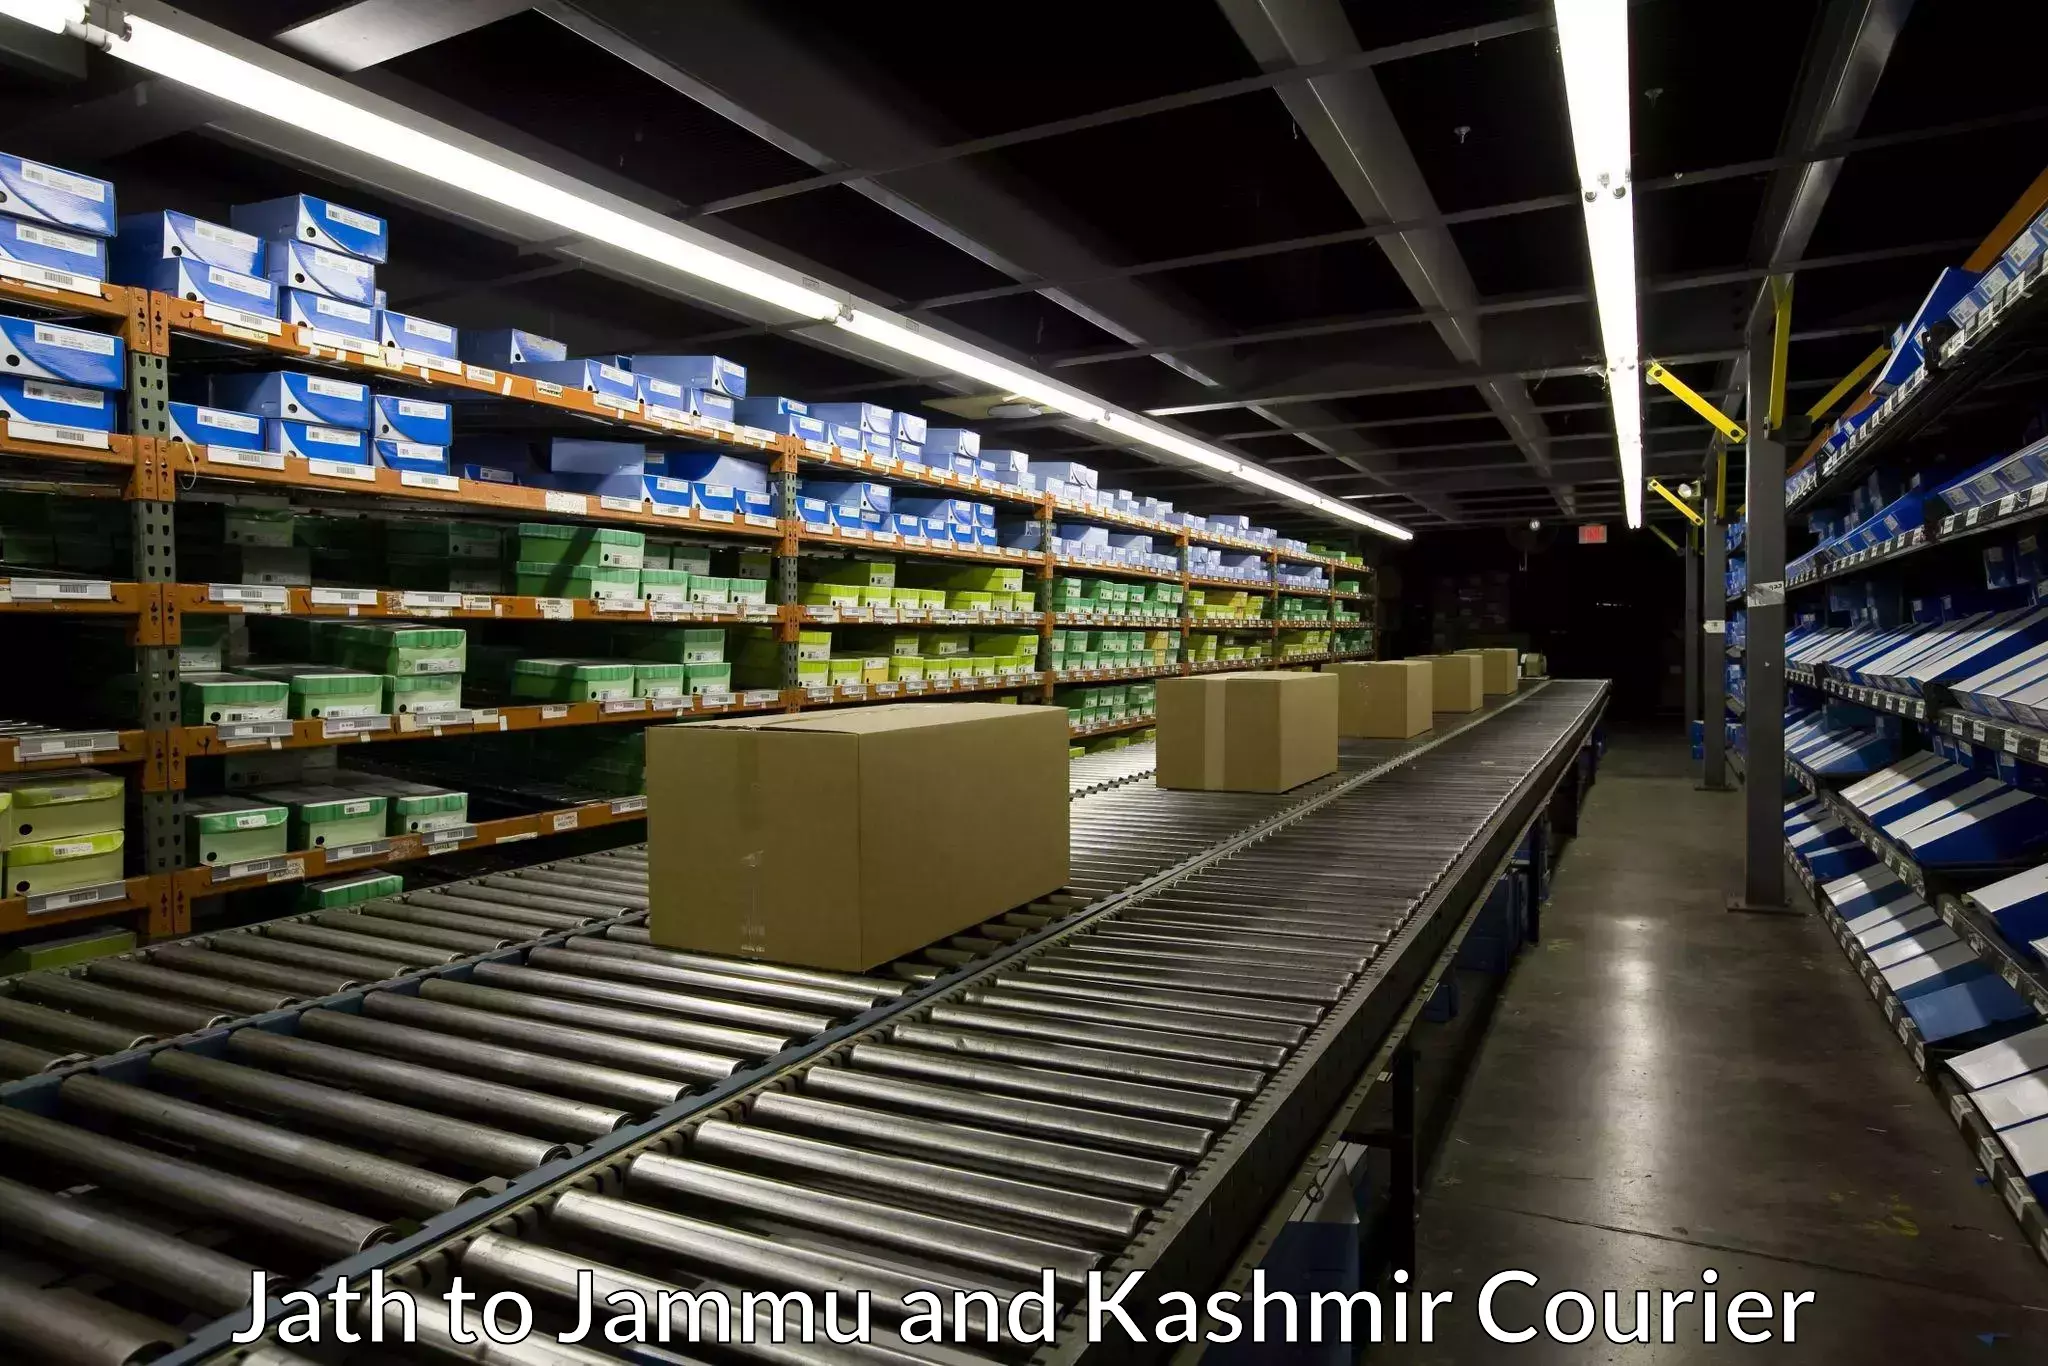 Efficient shipping operations Jath to Jammu and Kashmir